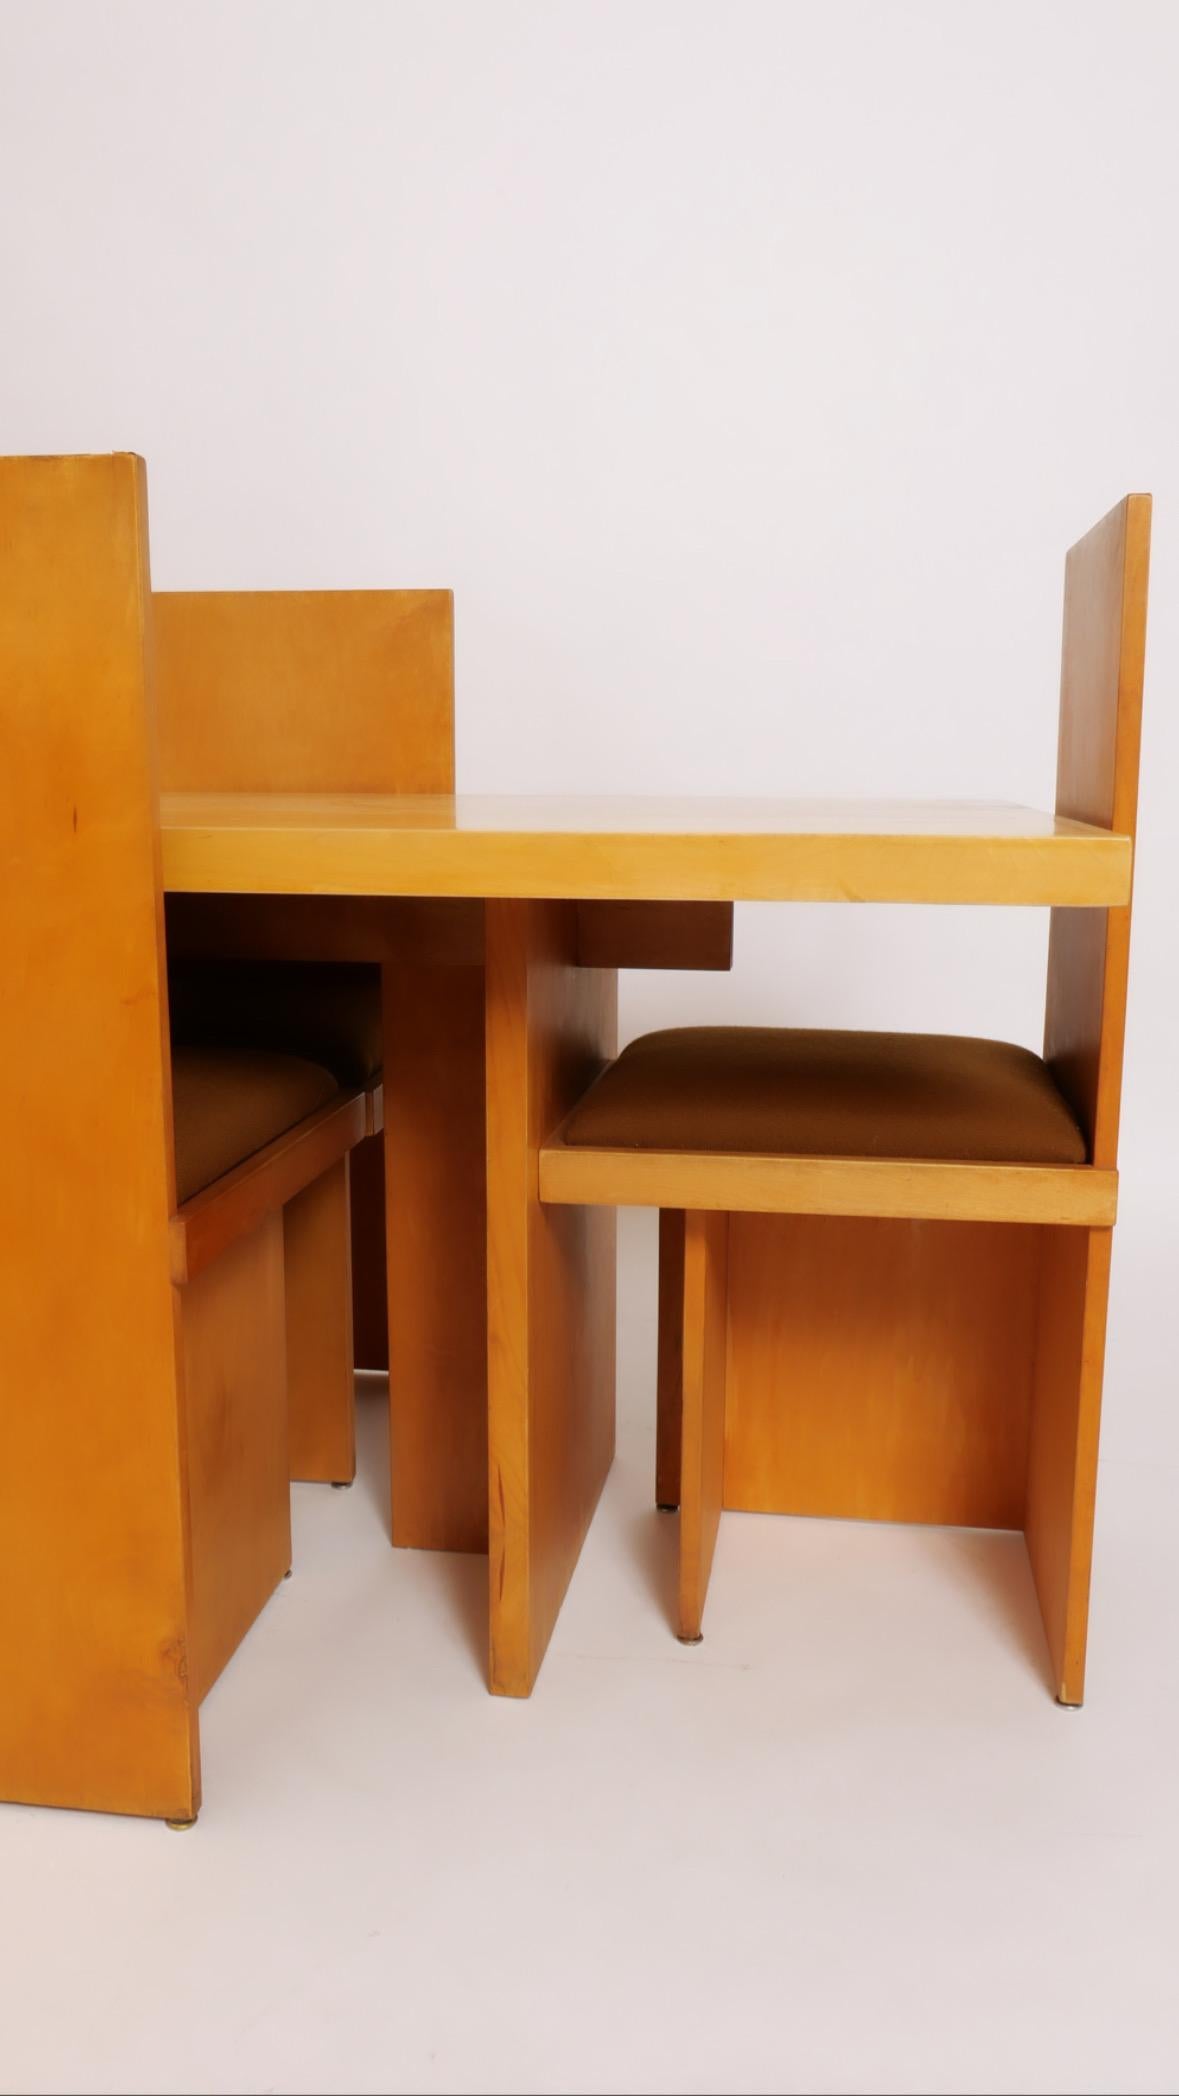 American Modernist Plywood Dining Set after Donald Judd